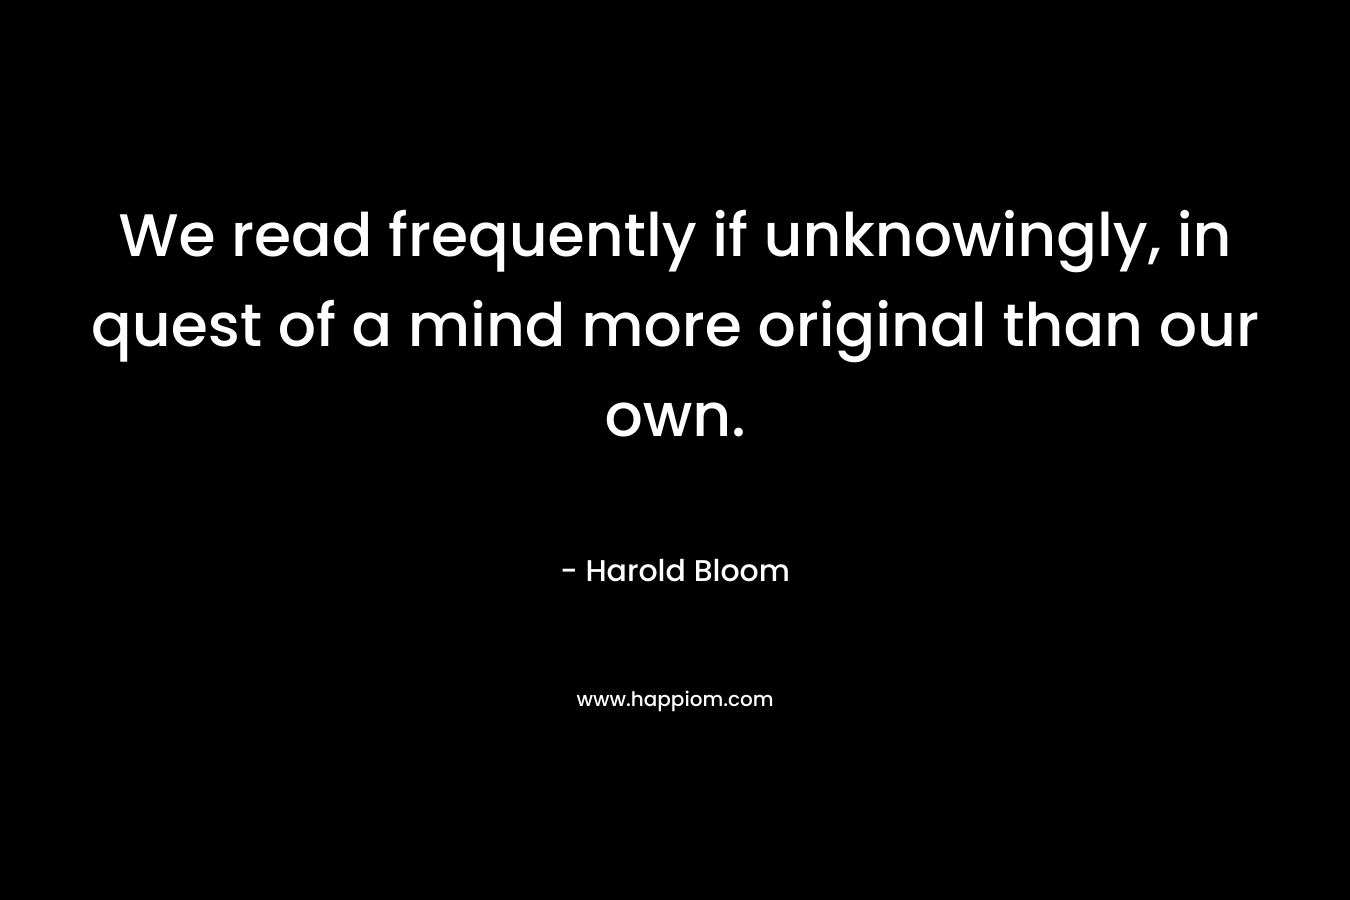 We read frequently if unknowingly, in quest of a mind more original than our own.